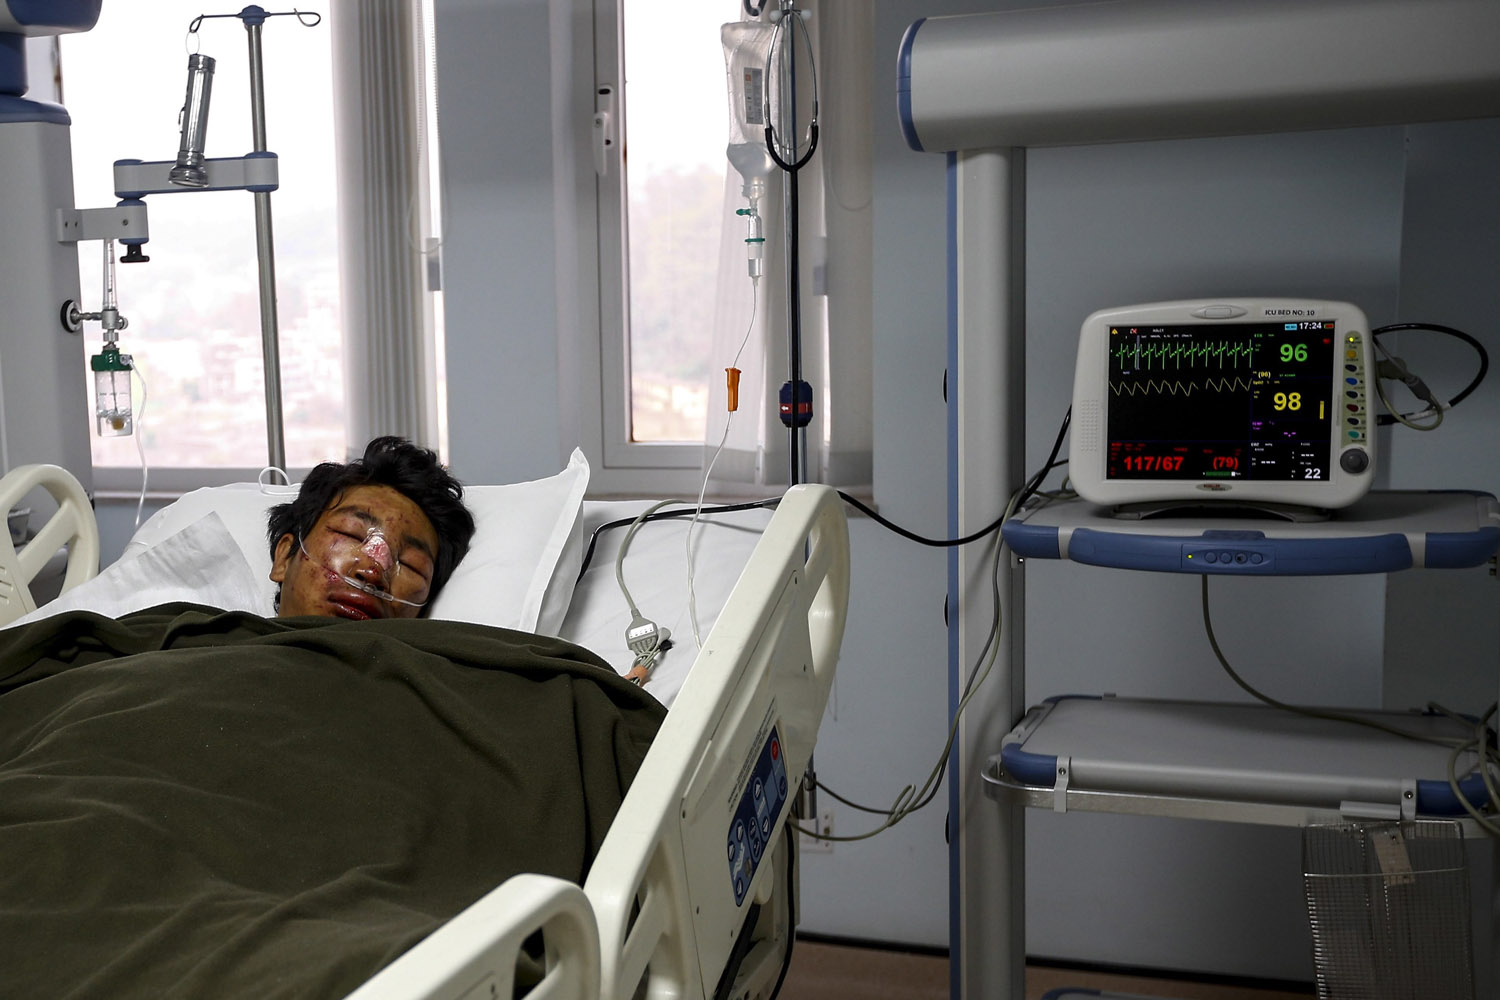 Apr. 18, 2014. Nepalese Mountaineer and Mount Everest avalanche survivor sherpa Tashi Daba is undergoing treatment at the Intensive Care Unit of Grandee Hospital in Kathmandu, Nepal.